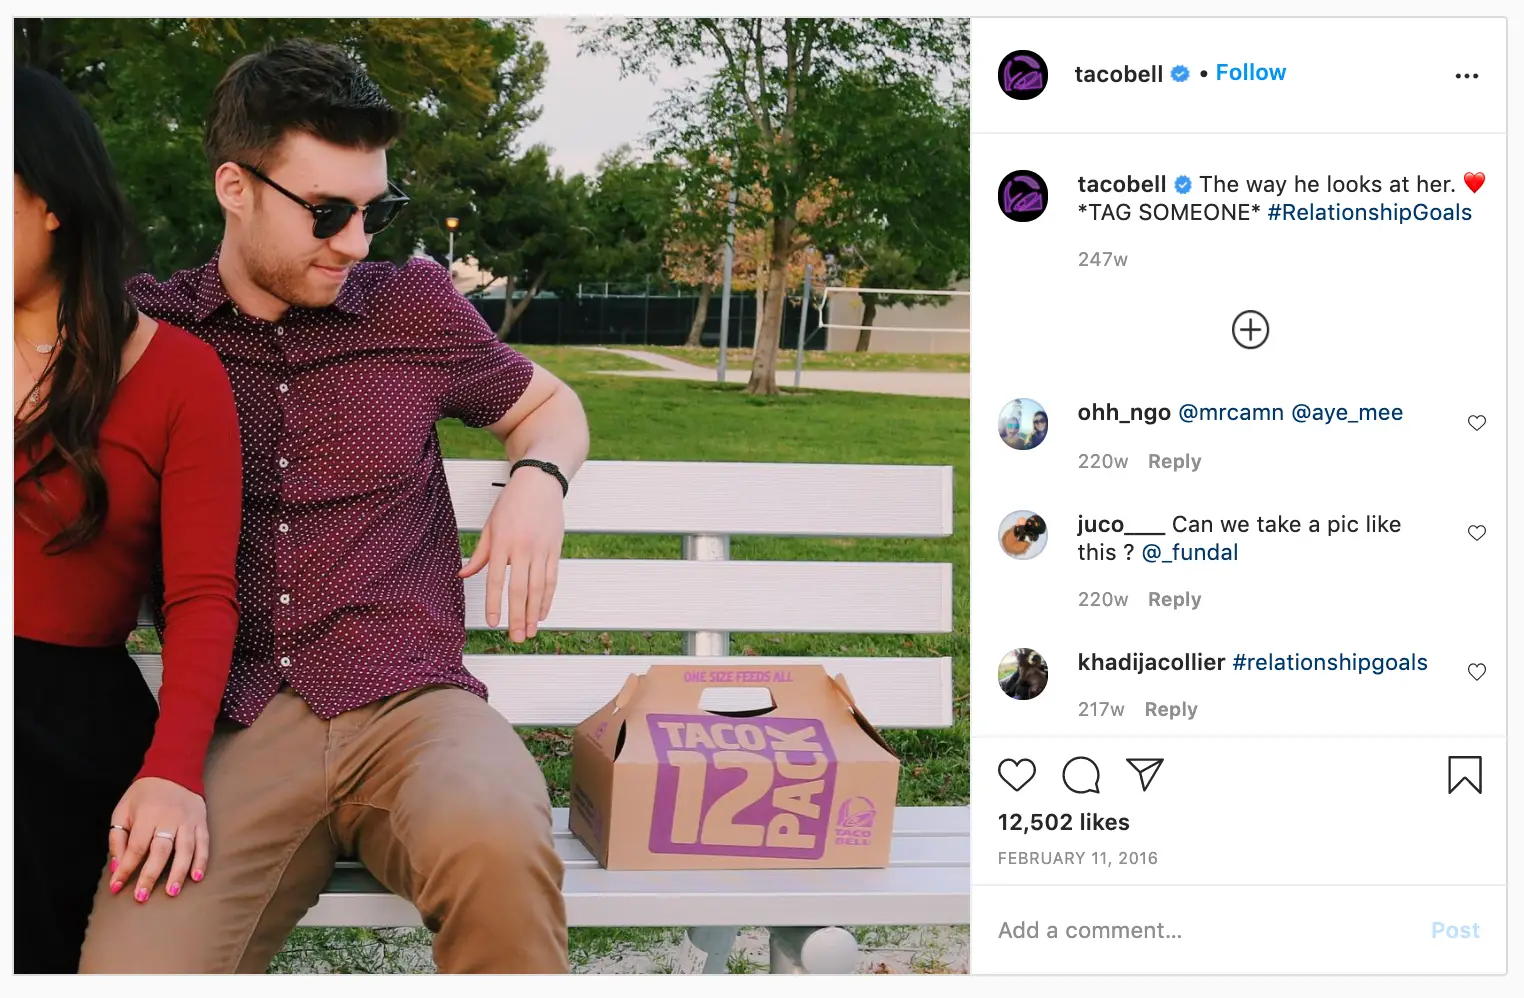 Humorous social post caption by Taco Bell